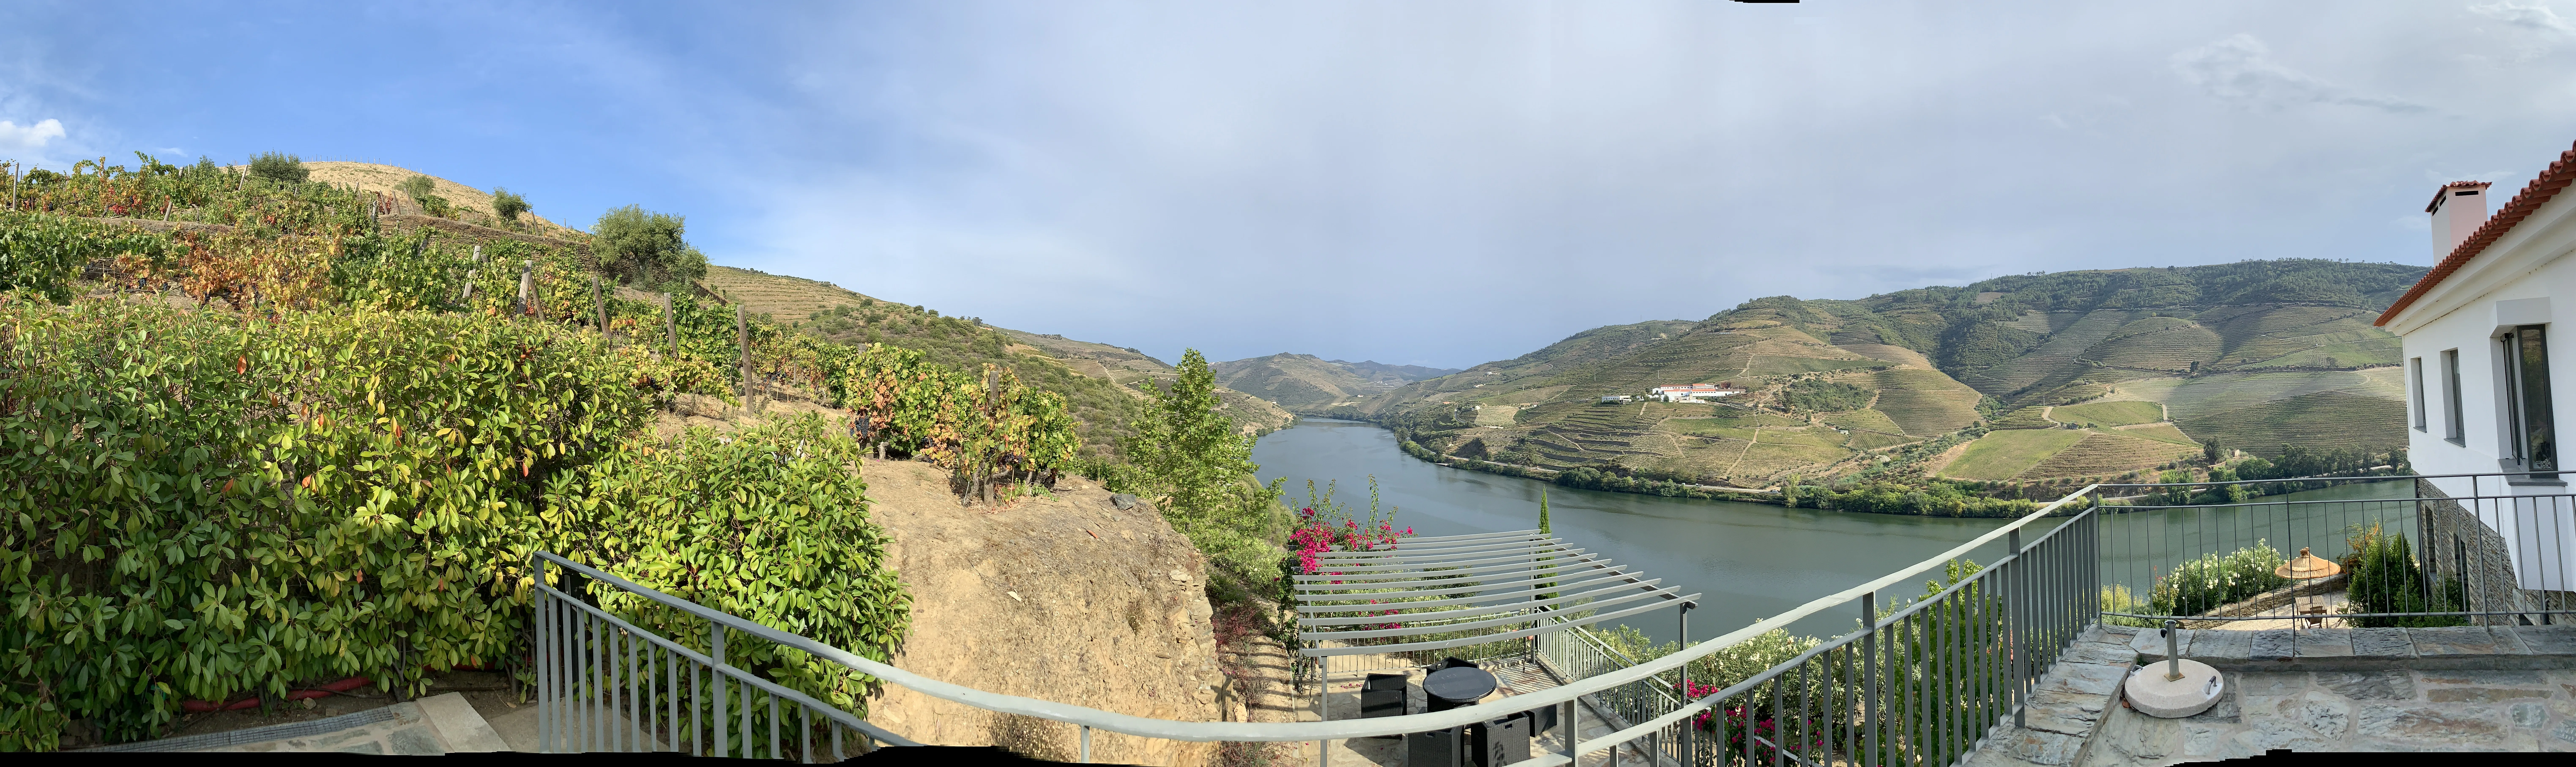 Panoramic view of Quinta da Marka's property, vineyards, and the Douro river